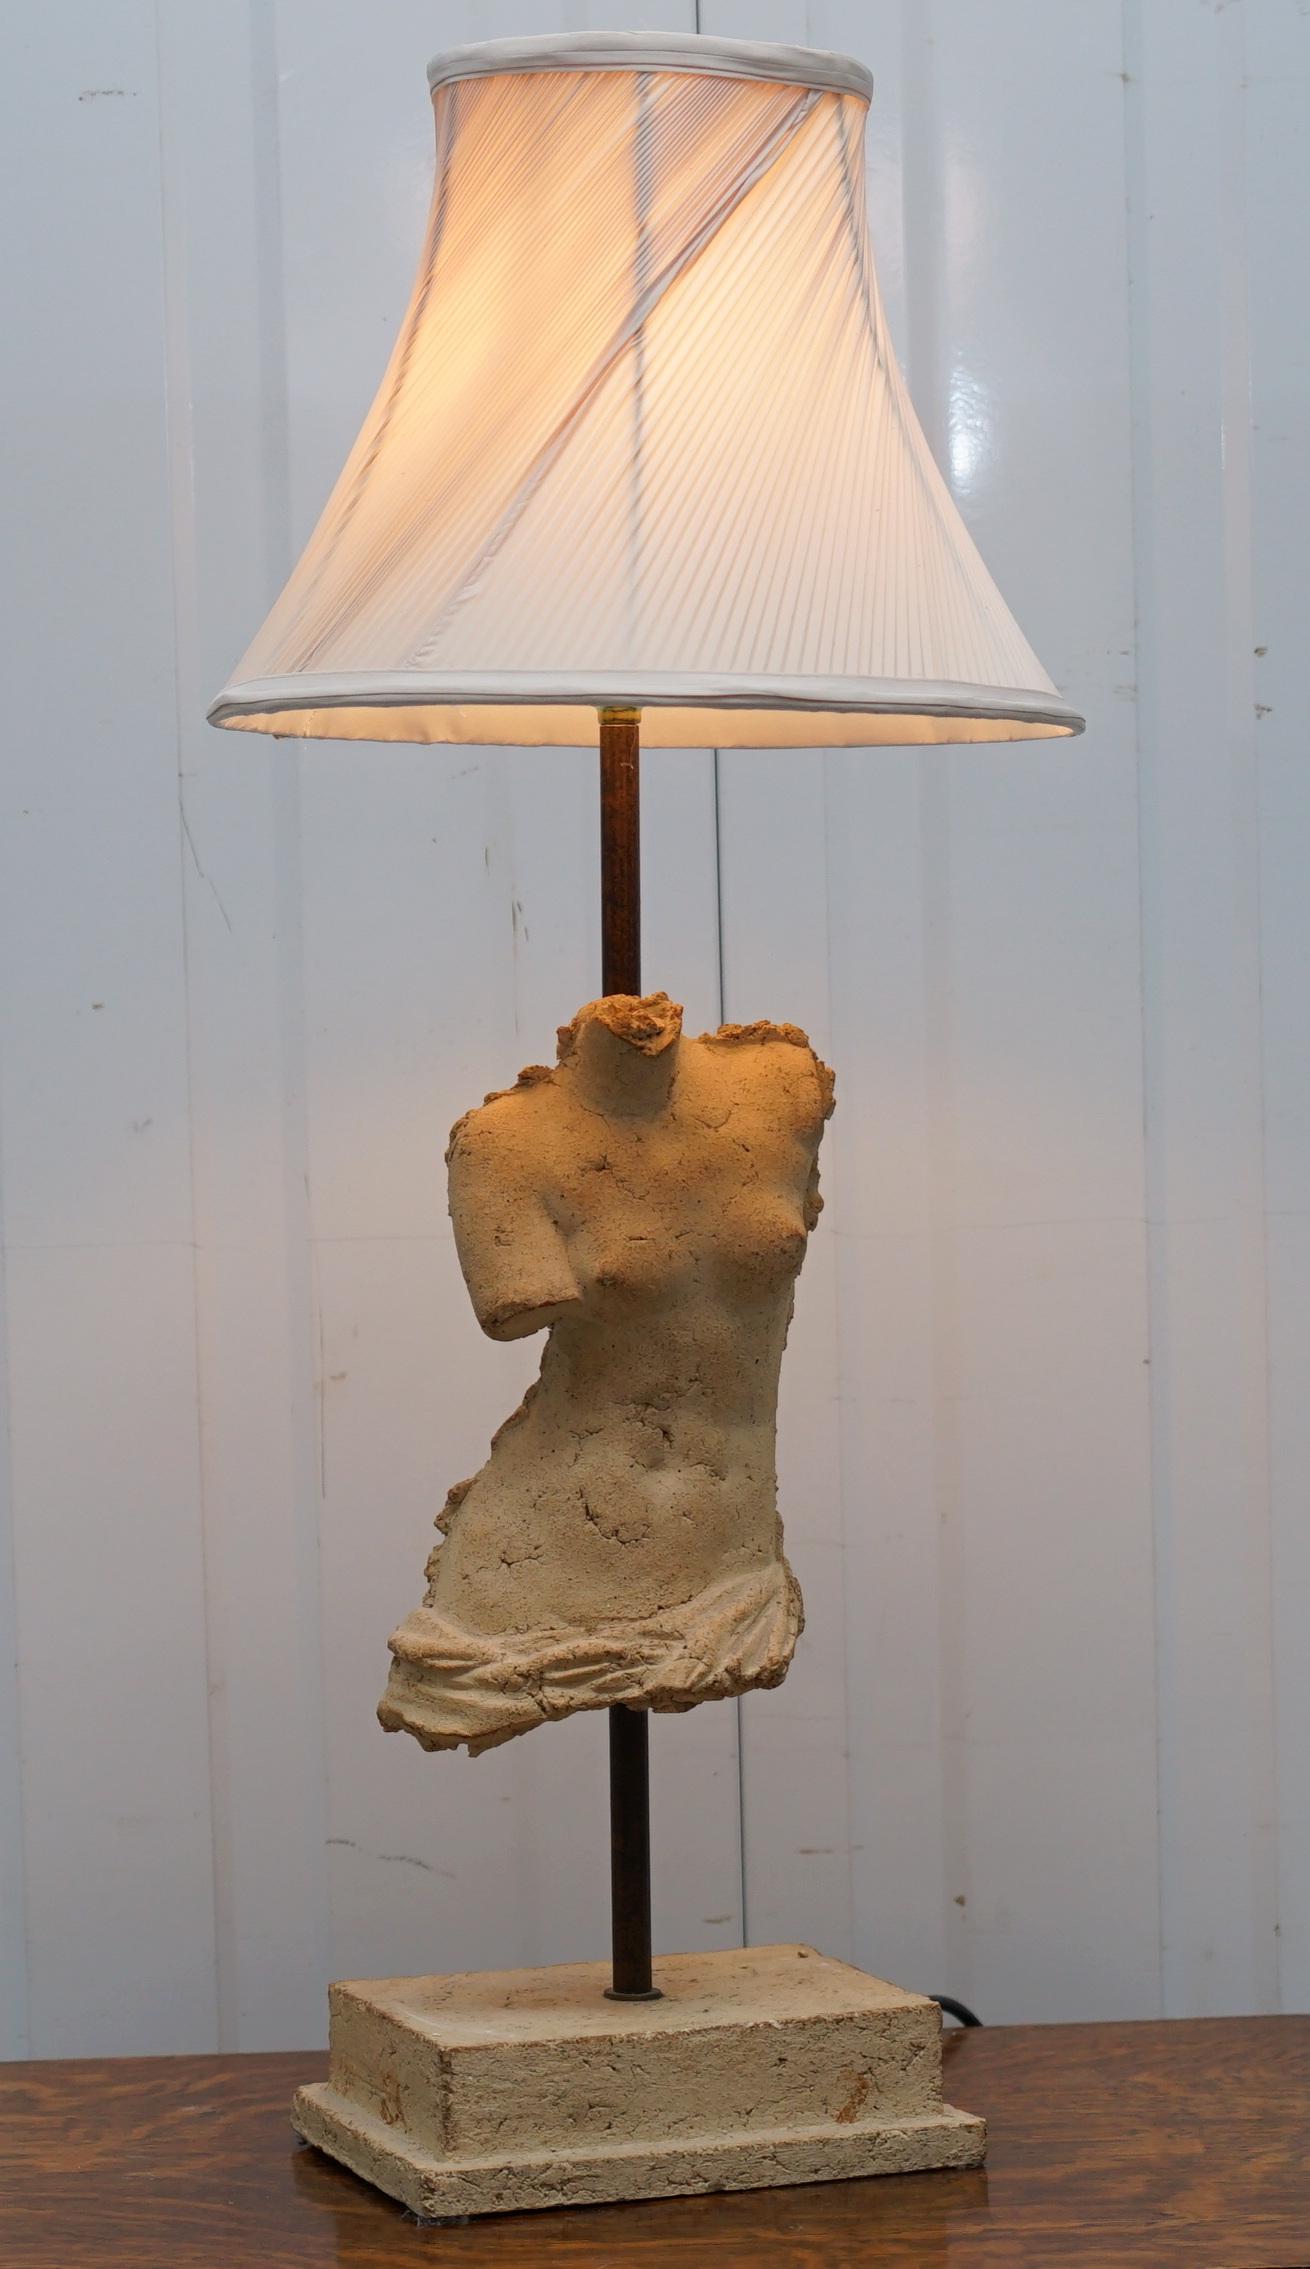 We are delighted to offer for sale this lovely original Atelier Michel Cayla stone torso table lamp

A very good looking and well-made lamp, exceptionally decorative and I think the only one of its type

The torso is height adjustable, the shade